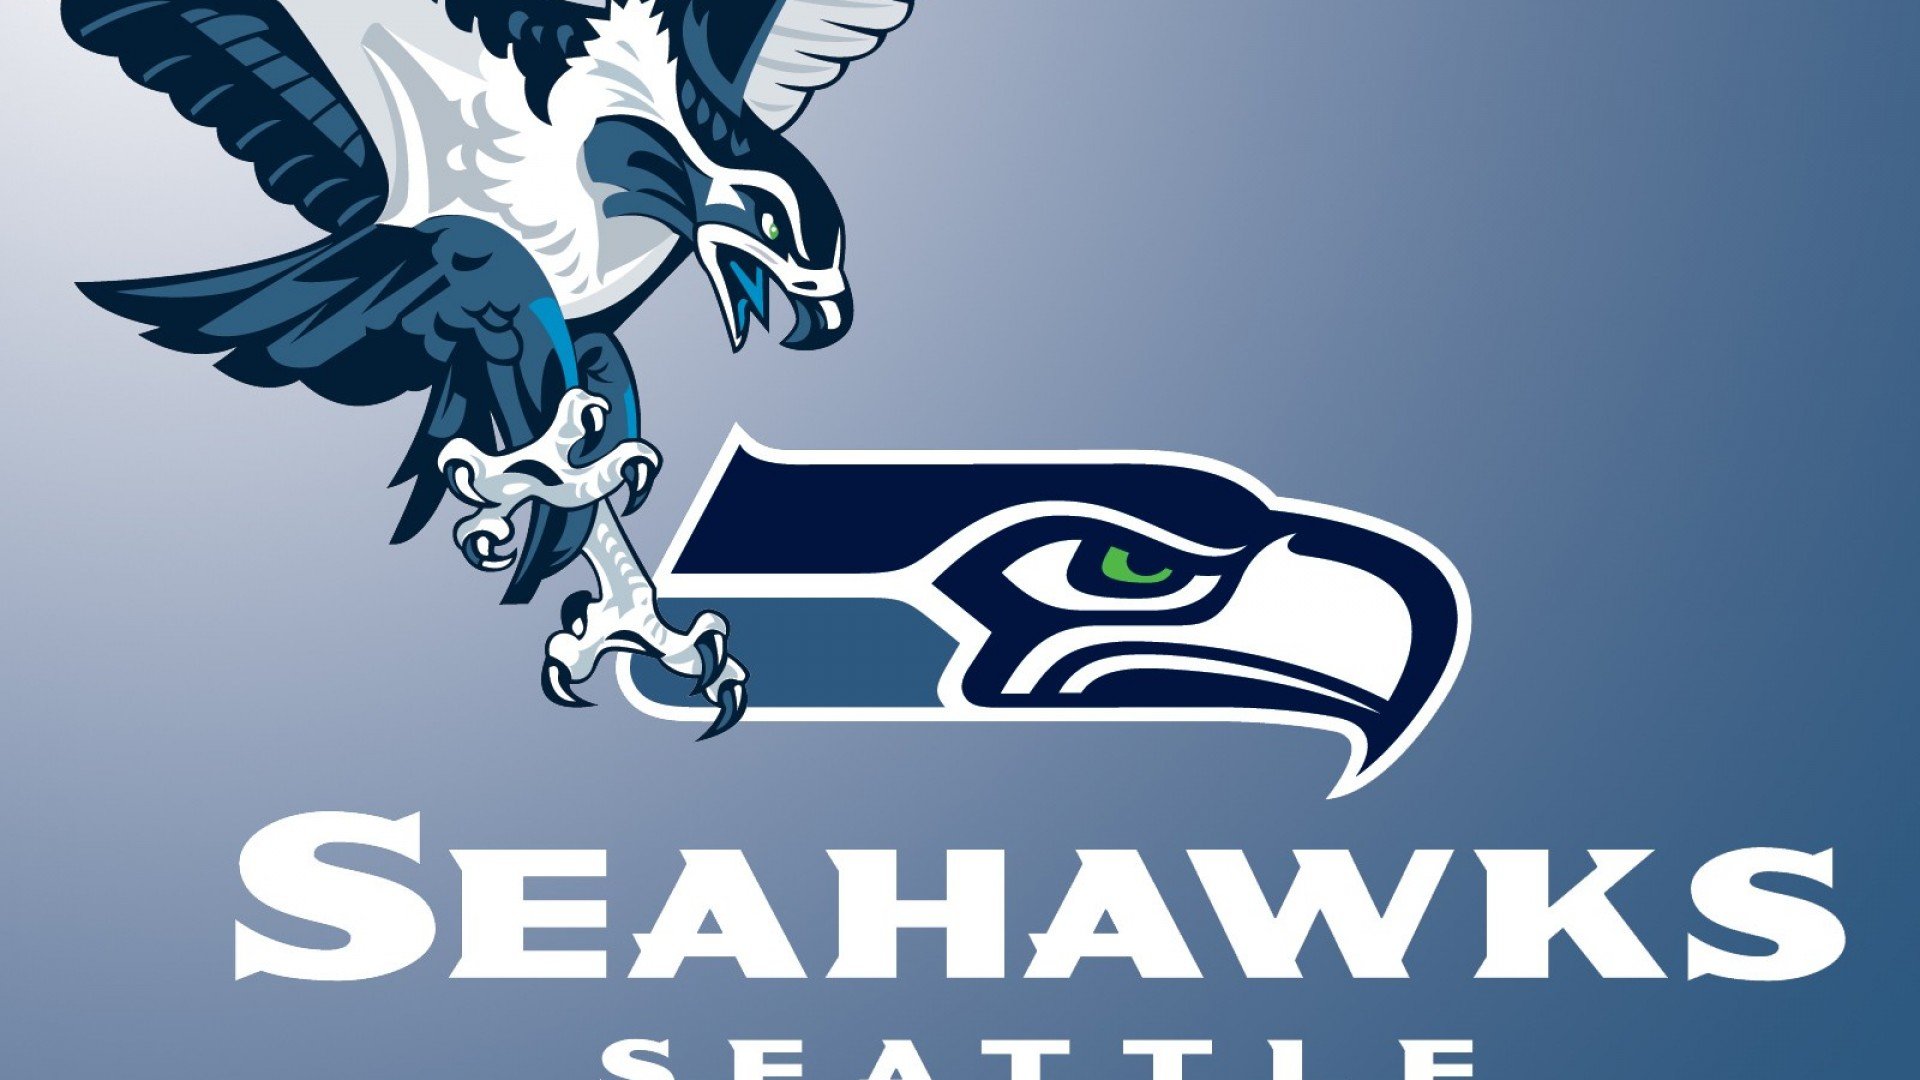  Seahawks NFL Backgrounds Full 1080p Ultra HD Wallpapers